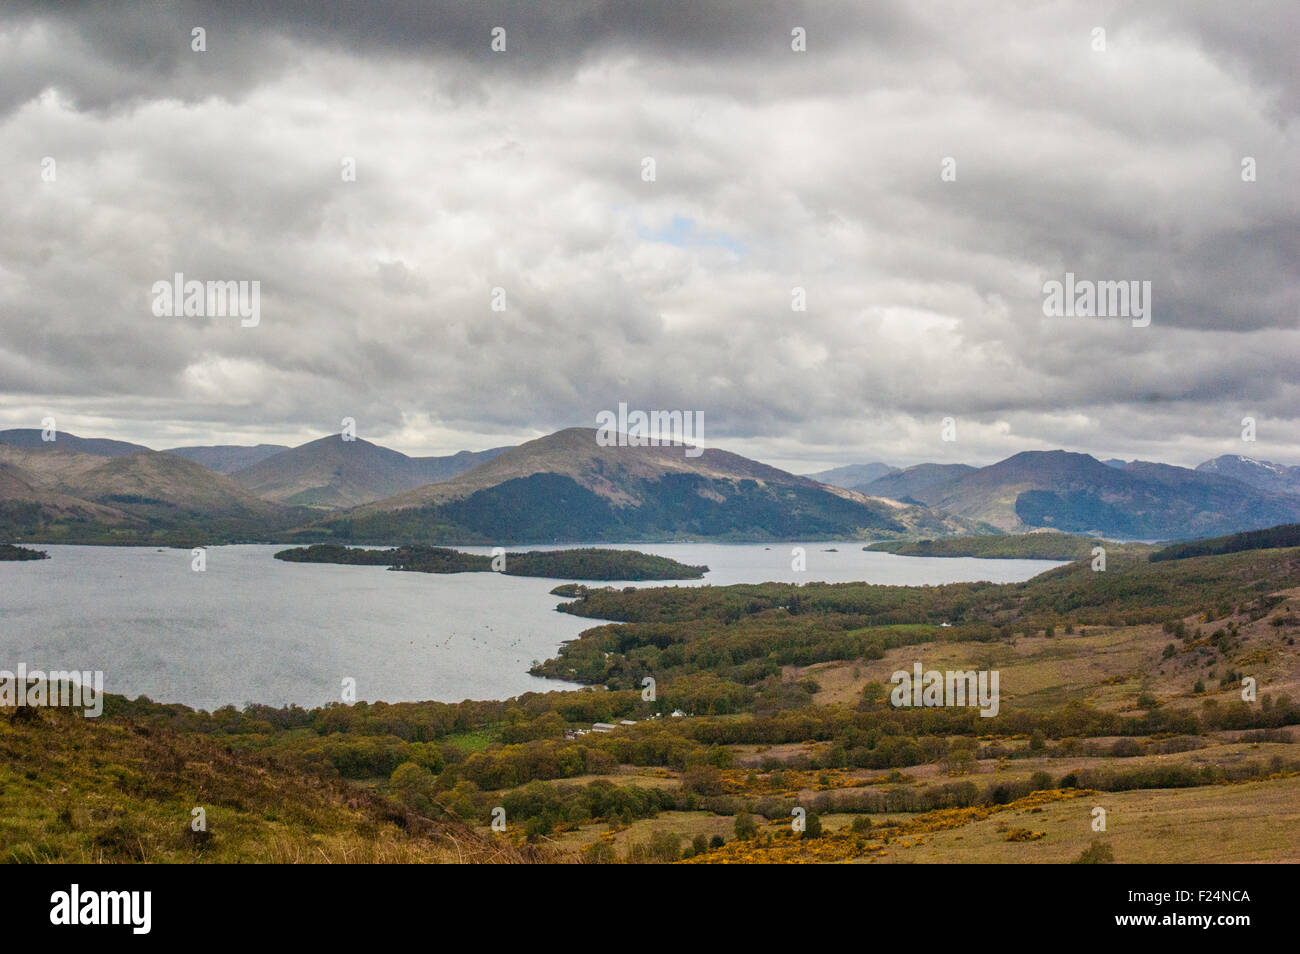 A view of the majestic mountains and sublime Loch Lomond, the Trossachs, Scotland Stock Photo